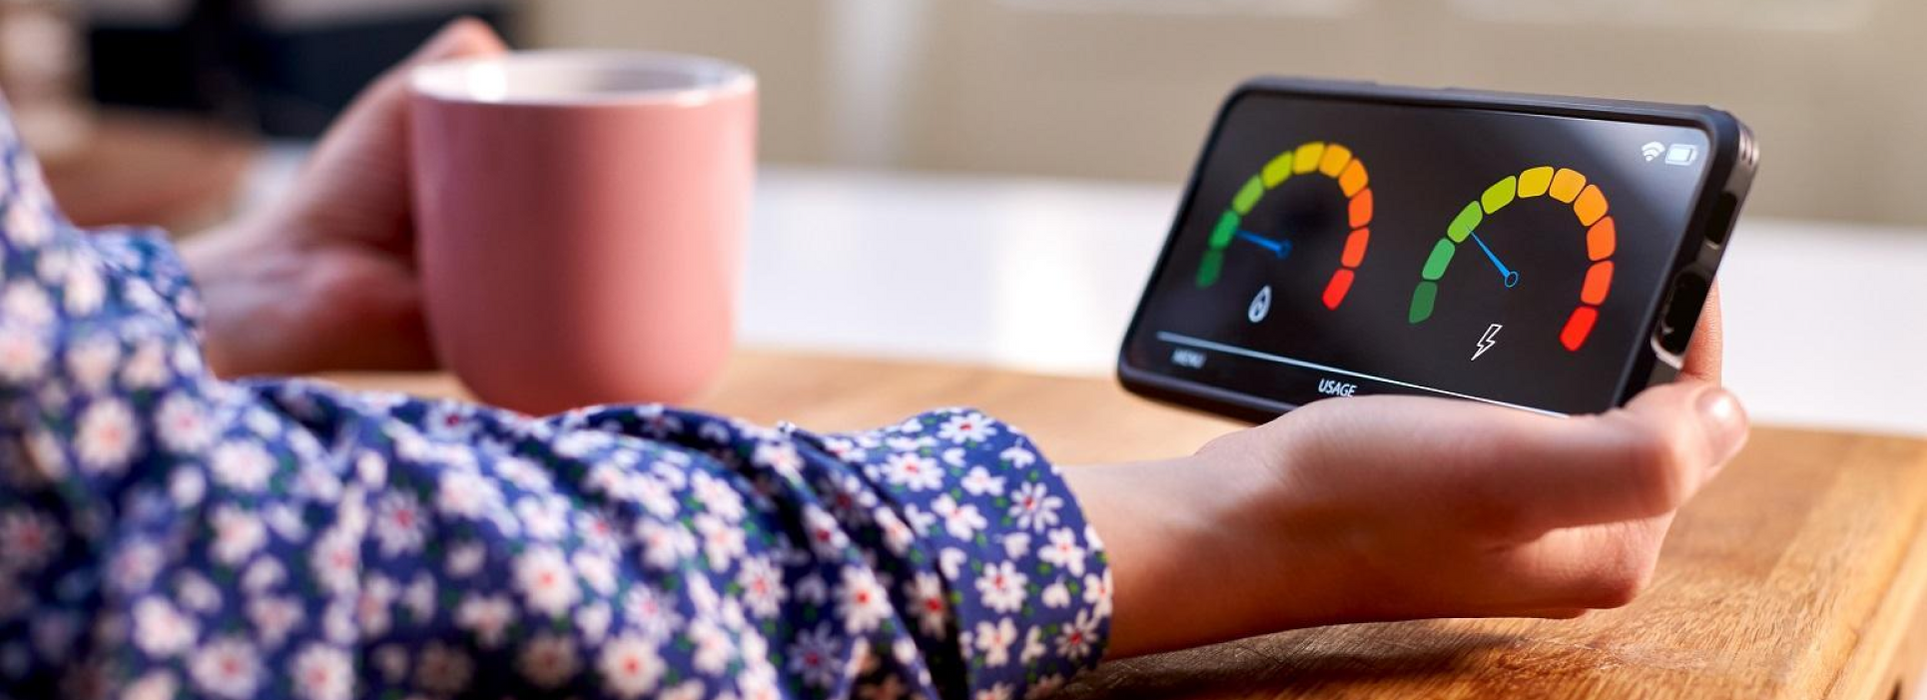 Smart Meter 101: Everything You Need to Know